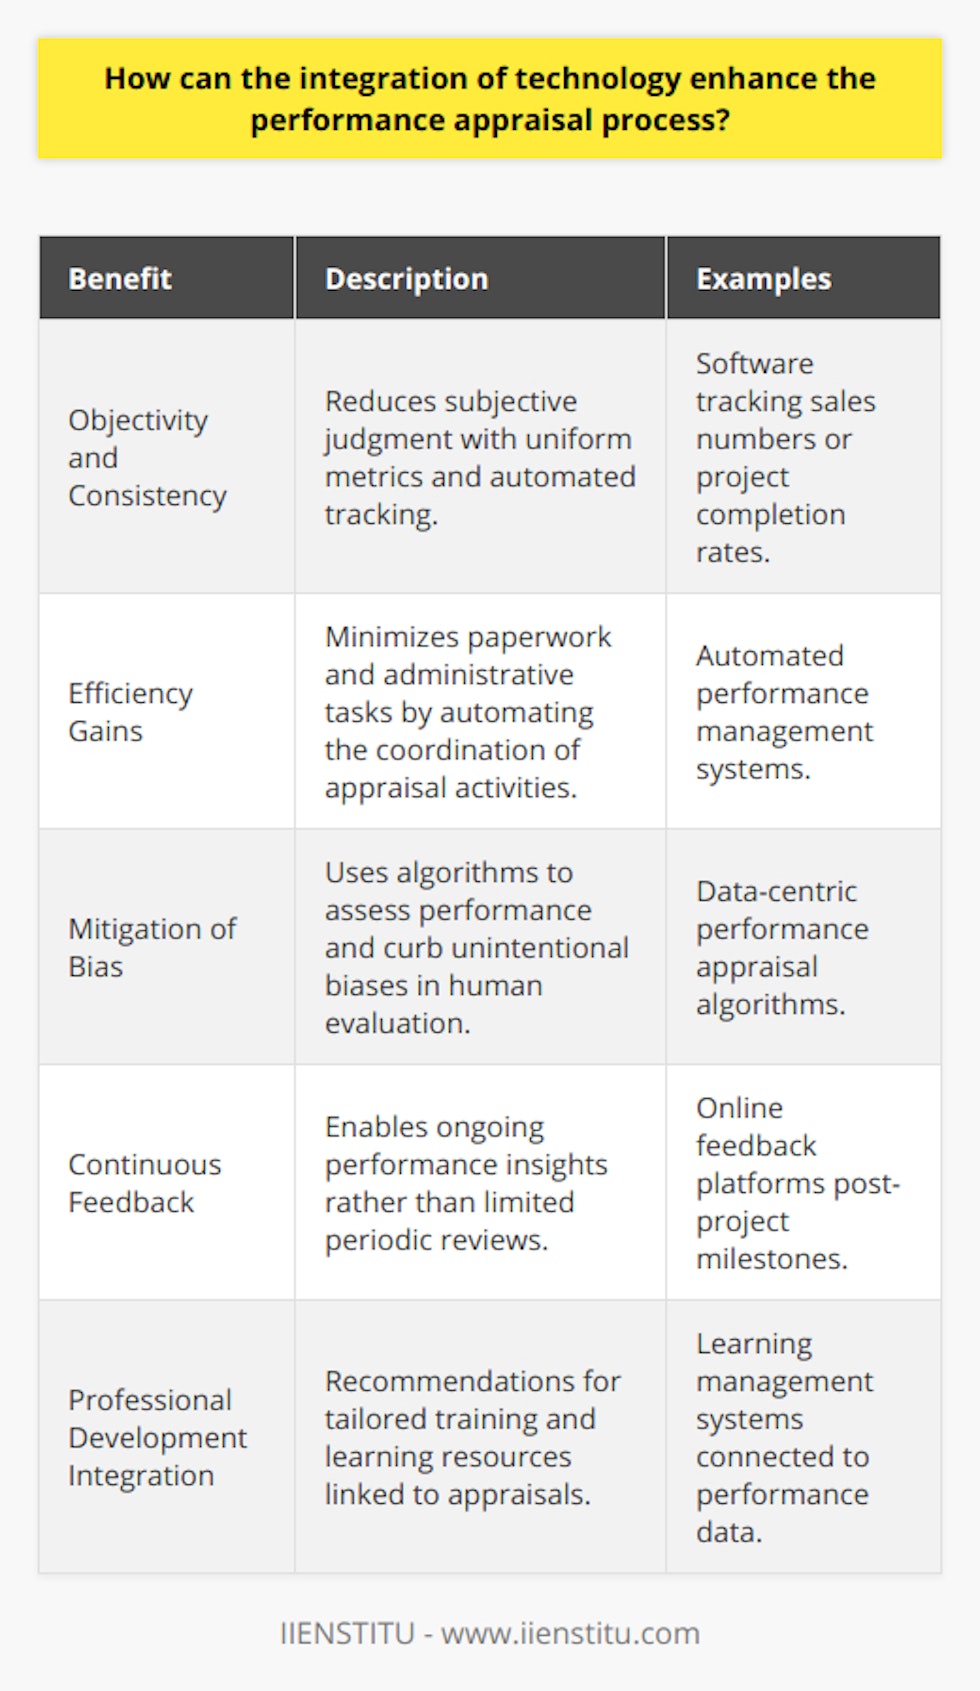 The use of technology in performance appraisal systems marks a significant step forward in the realm of human resources management. Incorporating technological tools into performance evaluations can lead to marked improvements in the process by which organizations assess and enhance their workforce's capabilities.One of the primary benefits of technology integration is the enhancement of objectivity and consistency in appraisals. With uniform performance metrics codified in software, there is less room for subjective judgment, which can vary greatly between supervisors. For instance, an automated system can track an employee's sales numbers or project completion rates using predefined criteria that measure attainment consistently across the organization.Efficiency gains are another important outcome of integrating technology into performance appraisals. Automated systems streamline the coordination of appraisal activities, saving time for managers and HR professionals by minimizing paperwork and reducing the administrative burden. Additionally, the collection of performance data over time allows for the analysis of long-term trends and patterns, providing a strategic perspective on workforce development that manual methods cannot easily replicate.A key area where technology aids appraisal processes is in mitigating bias. Algorithms designed to appraise performance based on data-centric metrics help curb the unintentional prejudices that can affect human evaluators. By focusing evaluations on quantifiable outcomes, technology helps maintain fairness and equitability in the appraisal process, though it's essential to continuously audit these systems to ensure they do not perpetuate systemic biases.The facilitation of continuous feedback and development is perhaps one of the more transformative aspects of integrating technology into appraisals. Modern systems are not limited to annual or bi-annual reviews; they can provide ongoing insights into performance. For example, an online platform might allow team members to request and receive feedback immediately following project milestones, bolstering a culture of continuous performance dialogue and learning.Moreover, these systems can integrate with professional development tools, recommending tailored training modules or learning resources according to the specific needs and goals of each employee. This aspect helps bridge the gap between appraisal and development, creating a loop of continuous improvement and skill enhancement.In an increasingly competitive and dynamic corporate environment, the strategic application of technology in performance appraisal is not just beneficial; it is necessary. By adopting advanced software solutions, such as those offered by IIENSTITU, organizations can leverage the benefits discussed here to nurture transparency, drive engagement, and ultimately improve organizational performance. Through technological empowerment, performance appraisals transcend their traditional role, evolving into a dynamic process that propels both individual growth and overall enterprise success.